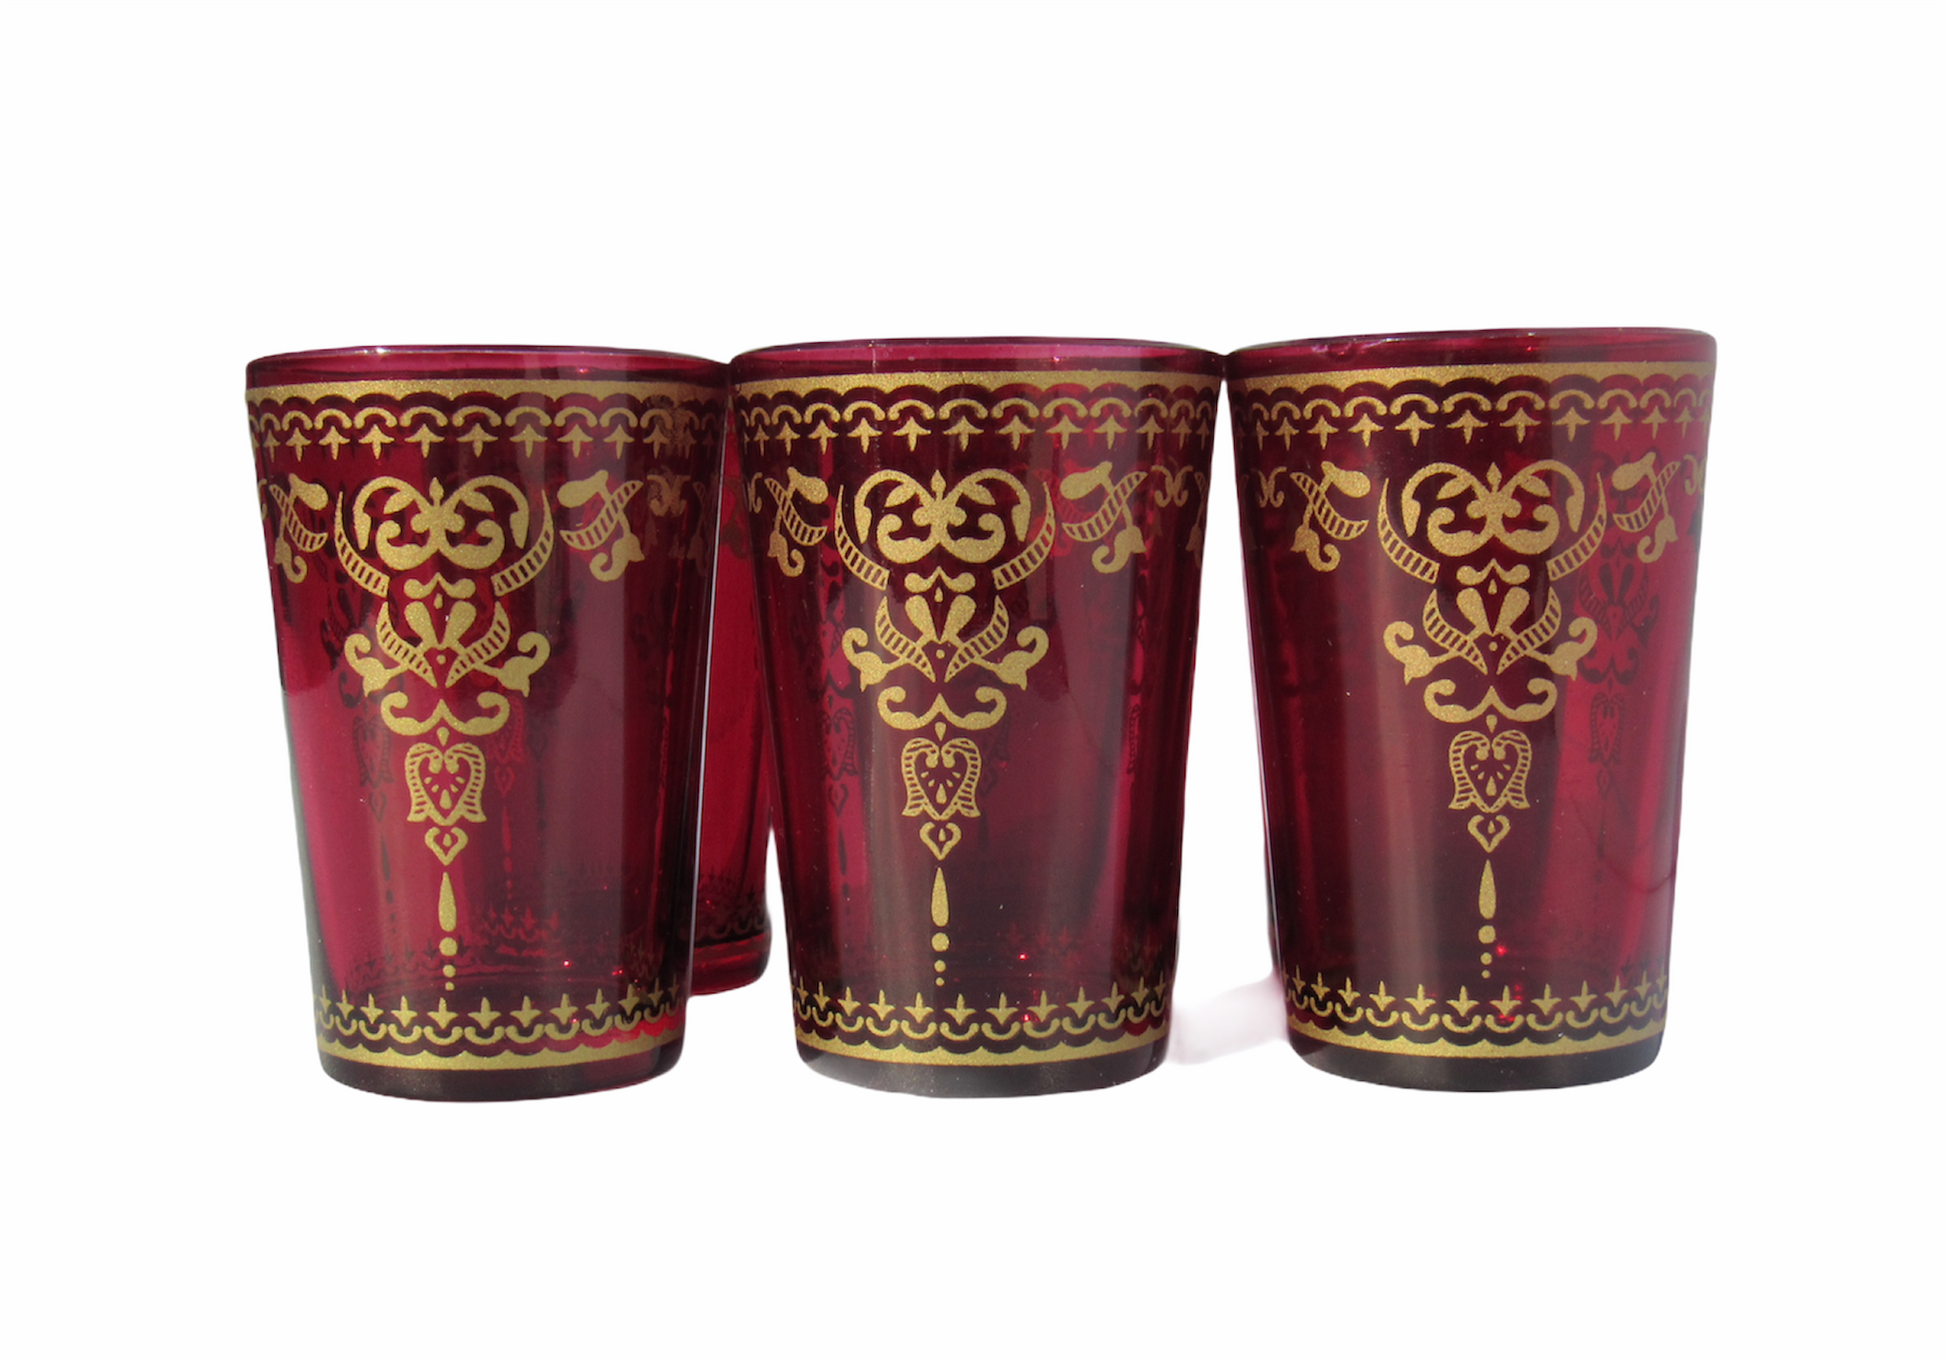 Moroccan Tea Glasses, Moroccan Drinking Glasses – Pack Of 6 – Unique and Stylish – Handmade Traditional Glass Set – For Tea, Coffee, Juice, Water, Etc. - Marrakesh Gardens